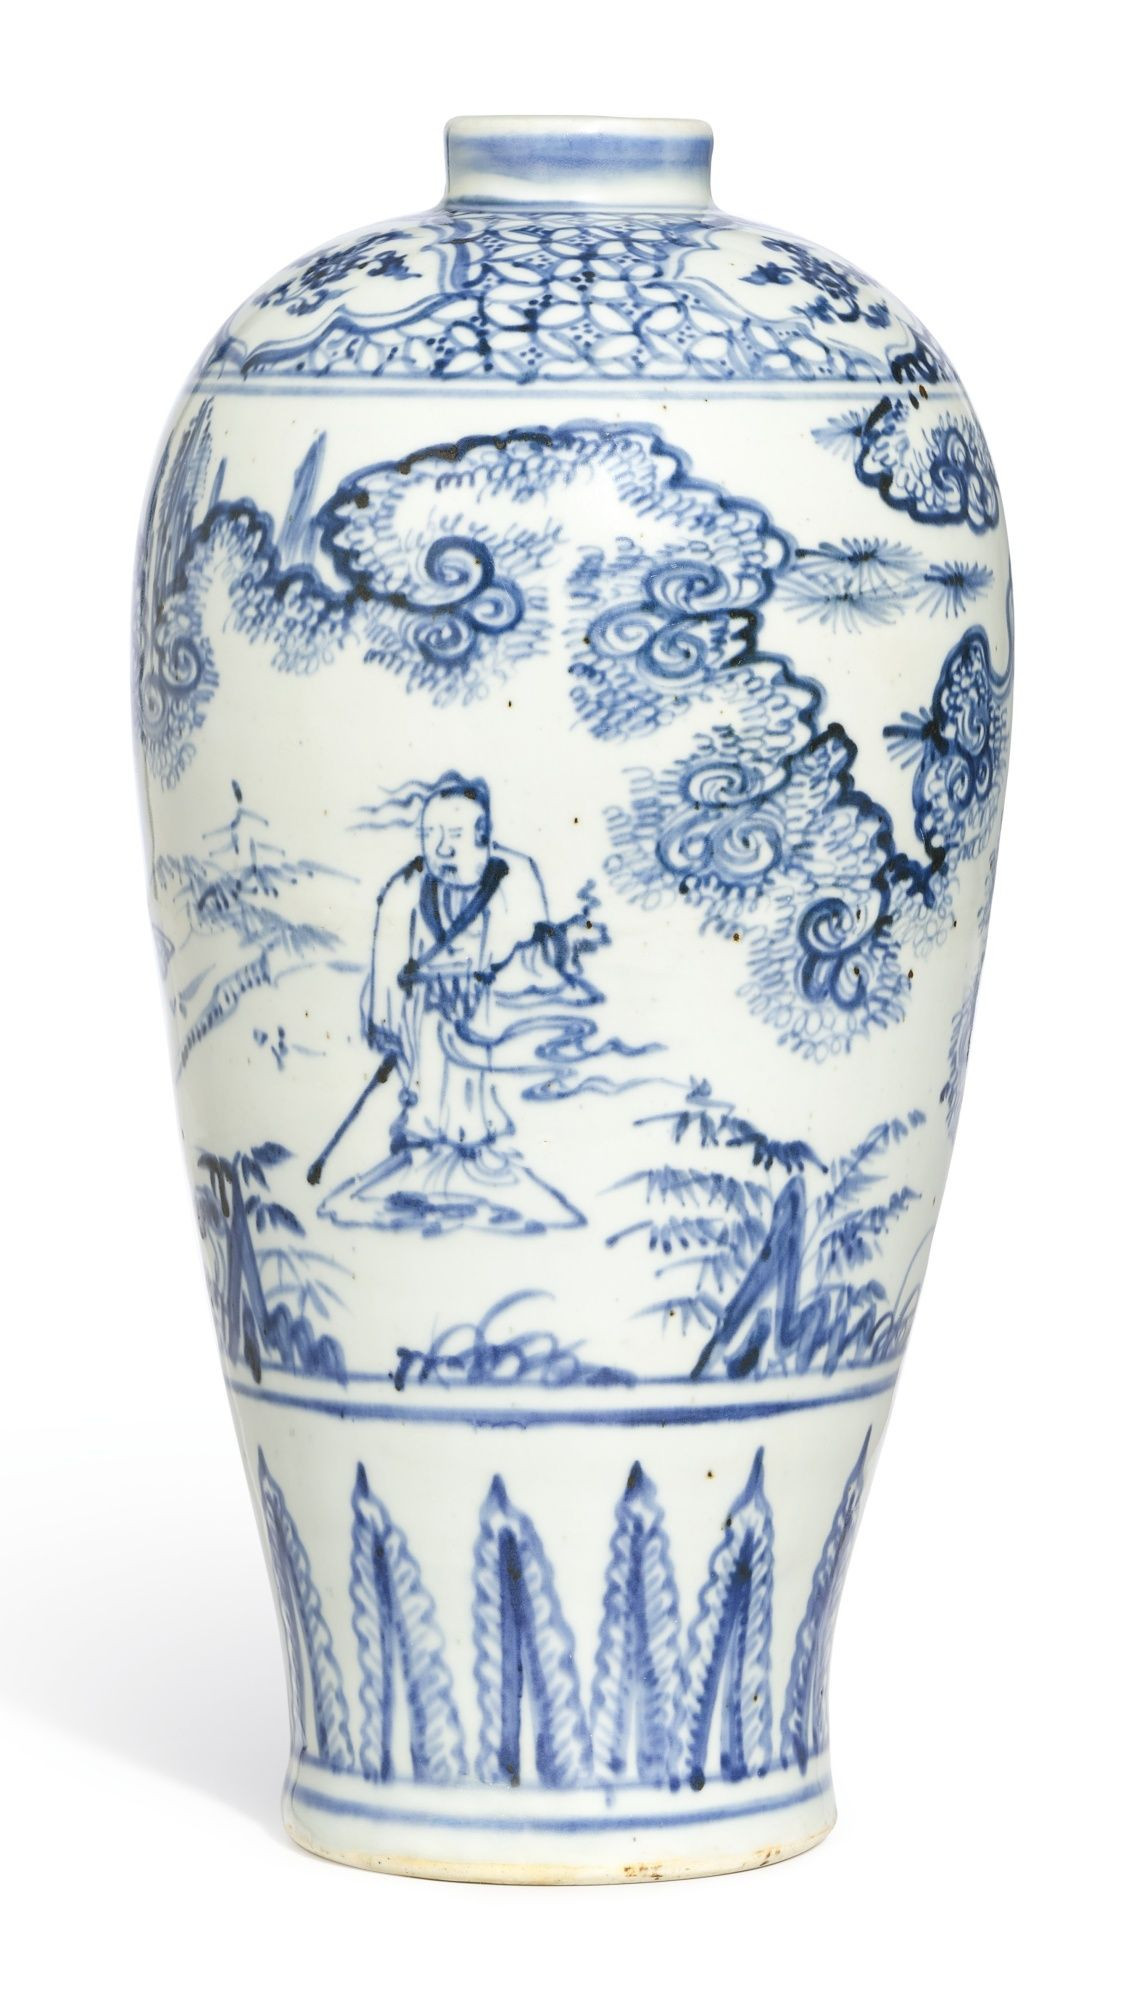 asian porcelain vases of antique white vase pics a blue and white figure meiping br ming within antique white vase pics a blue and white figure meiping br ming dynasty 15th century of